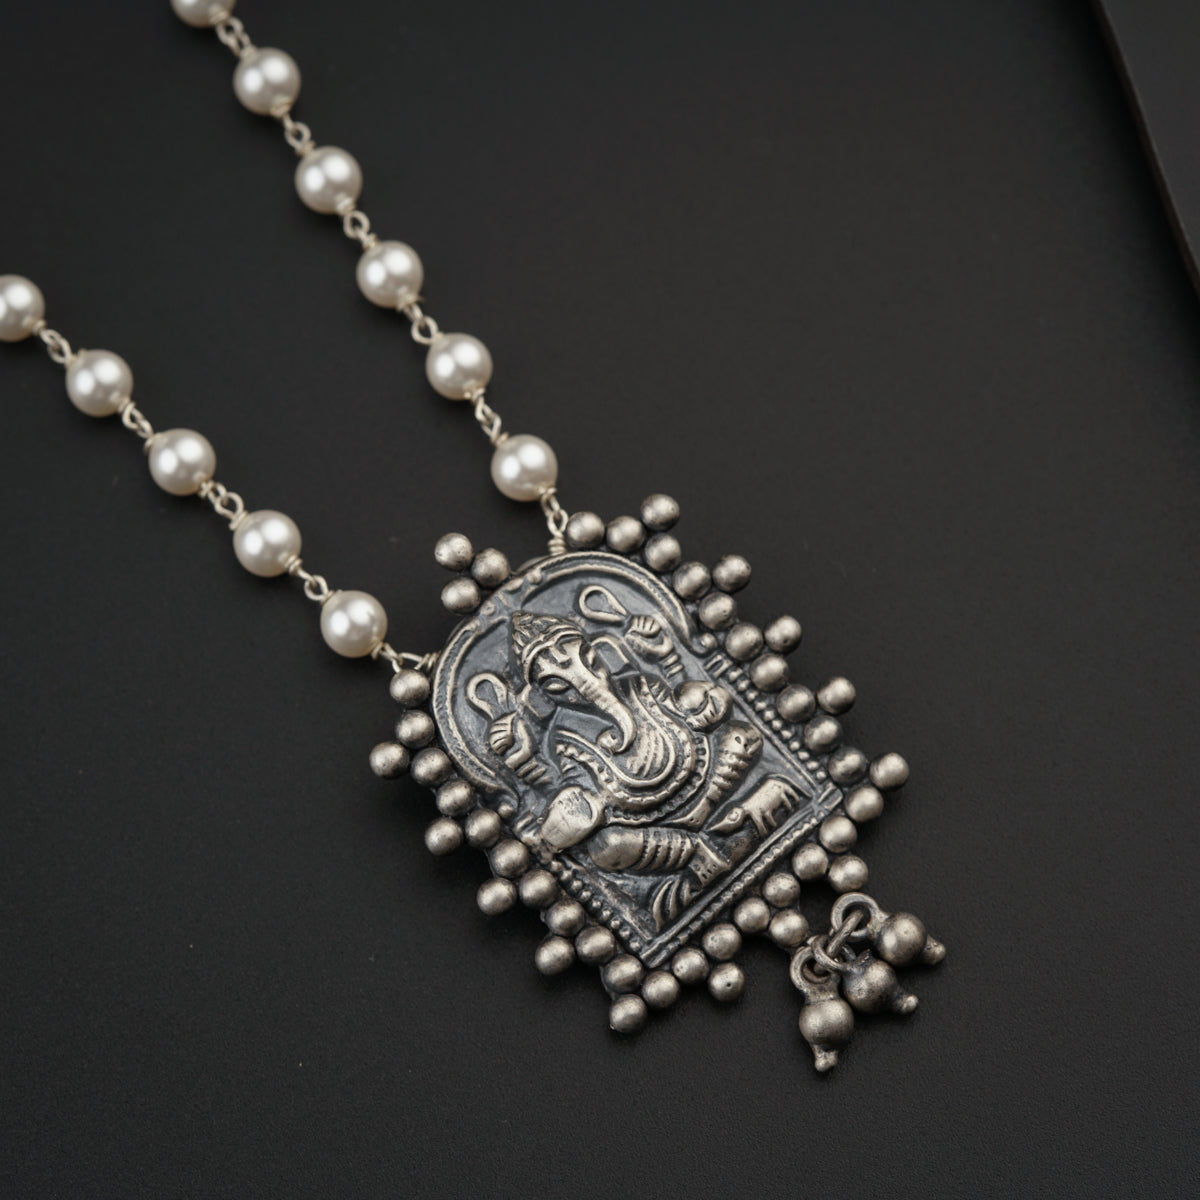 Ganesha Pendant Necklace with Pearls